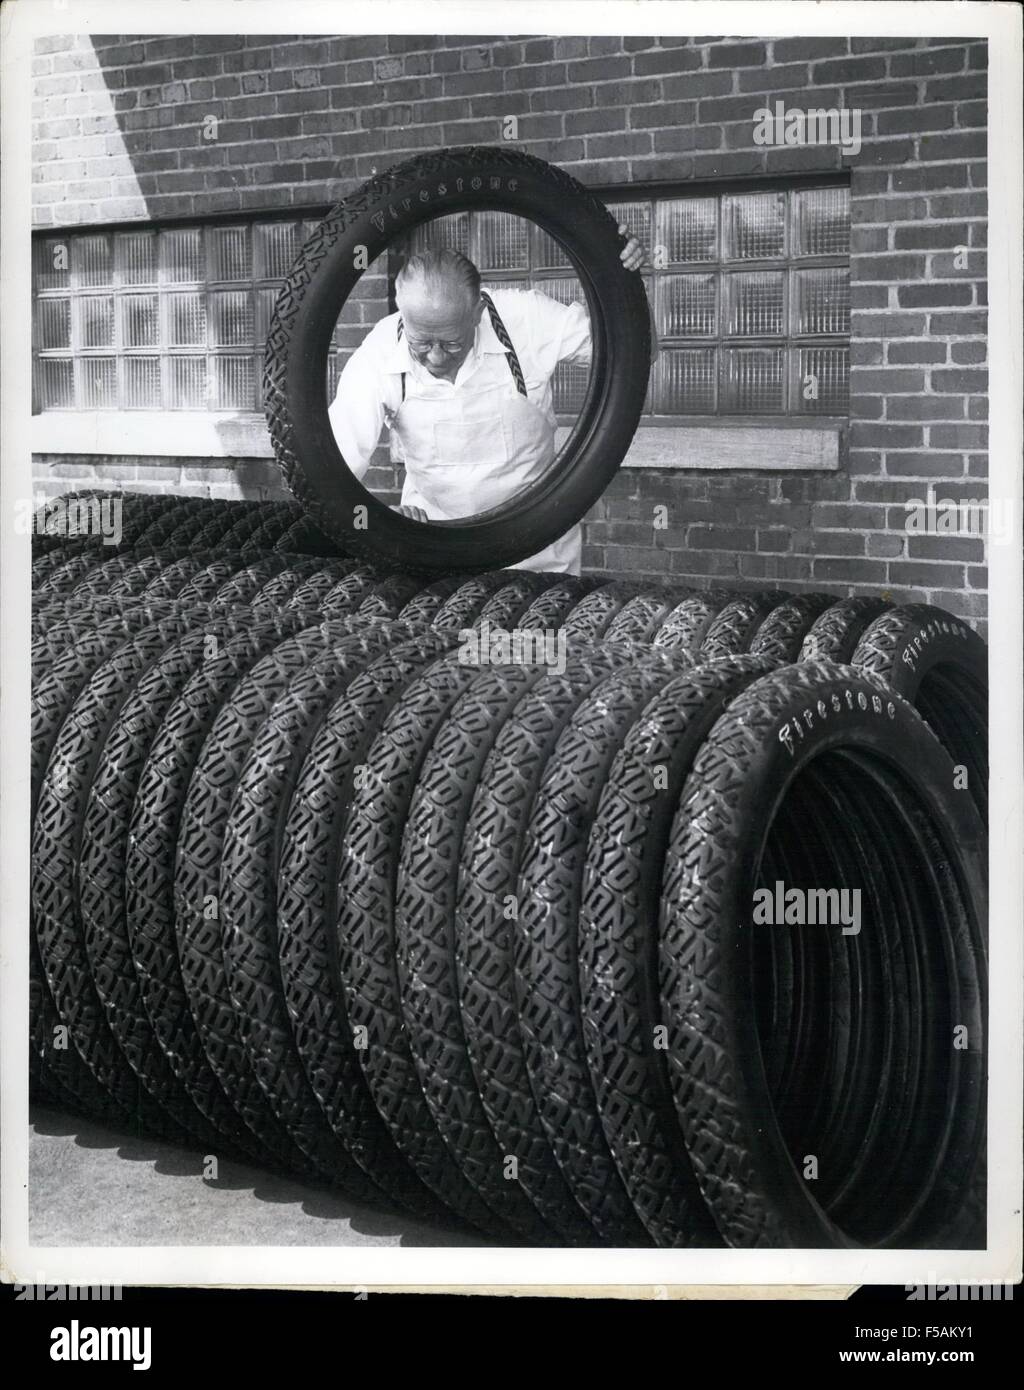 1968 - First shipment of old-fashioned tires is on its way from Akron, Ohio, to Washington to meet the needs of the 200 antique automobile owners who will parade down Constitution Avenue September 23 in celebration of the 50th anniversary of the American Automobile Association. Such tires are laboriously made by hand by veteran employees of The Firestone Tire & Rubber Company to duplicate the ones used in the early 1900's. Forty years ago William H. Lincks wrapped the same kind of tires he is shown inspecting above as they were readied for shipment from the Firestone plant in Akron. The parade Stock Photo